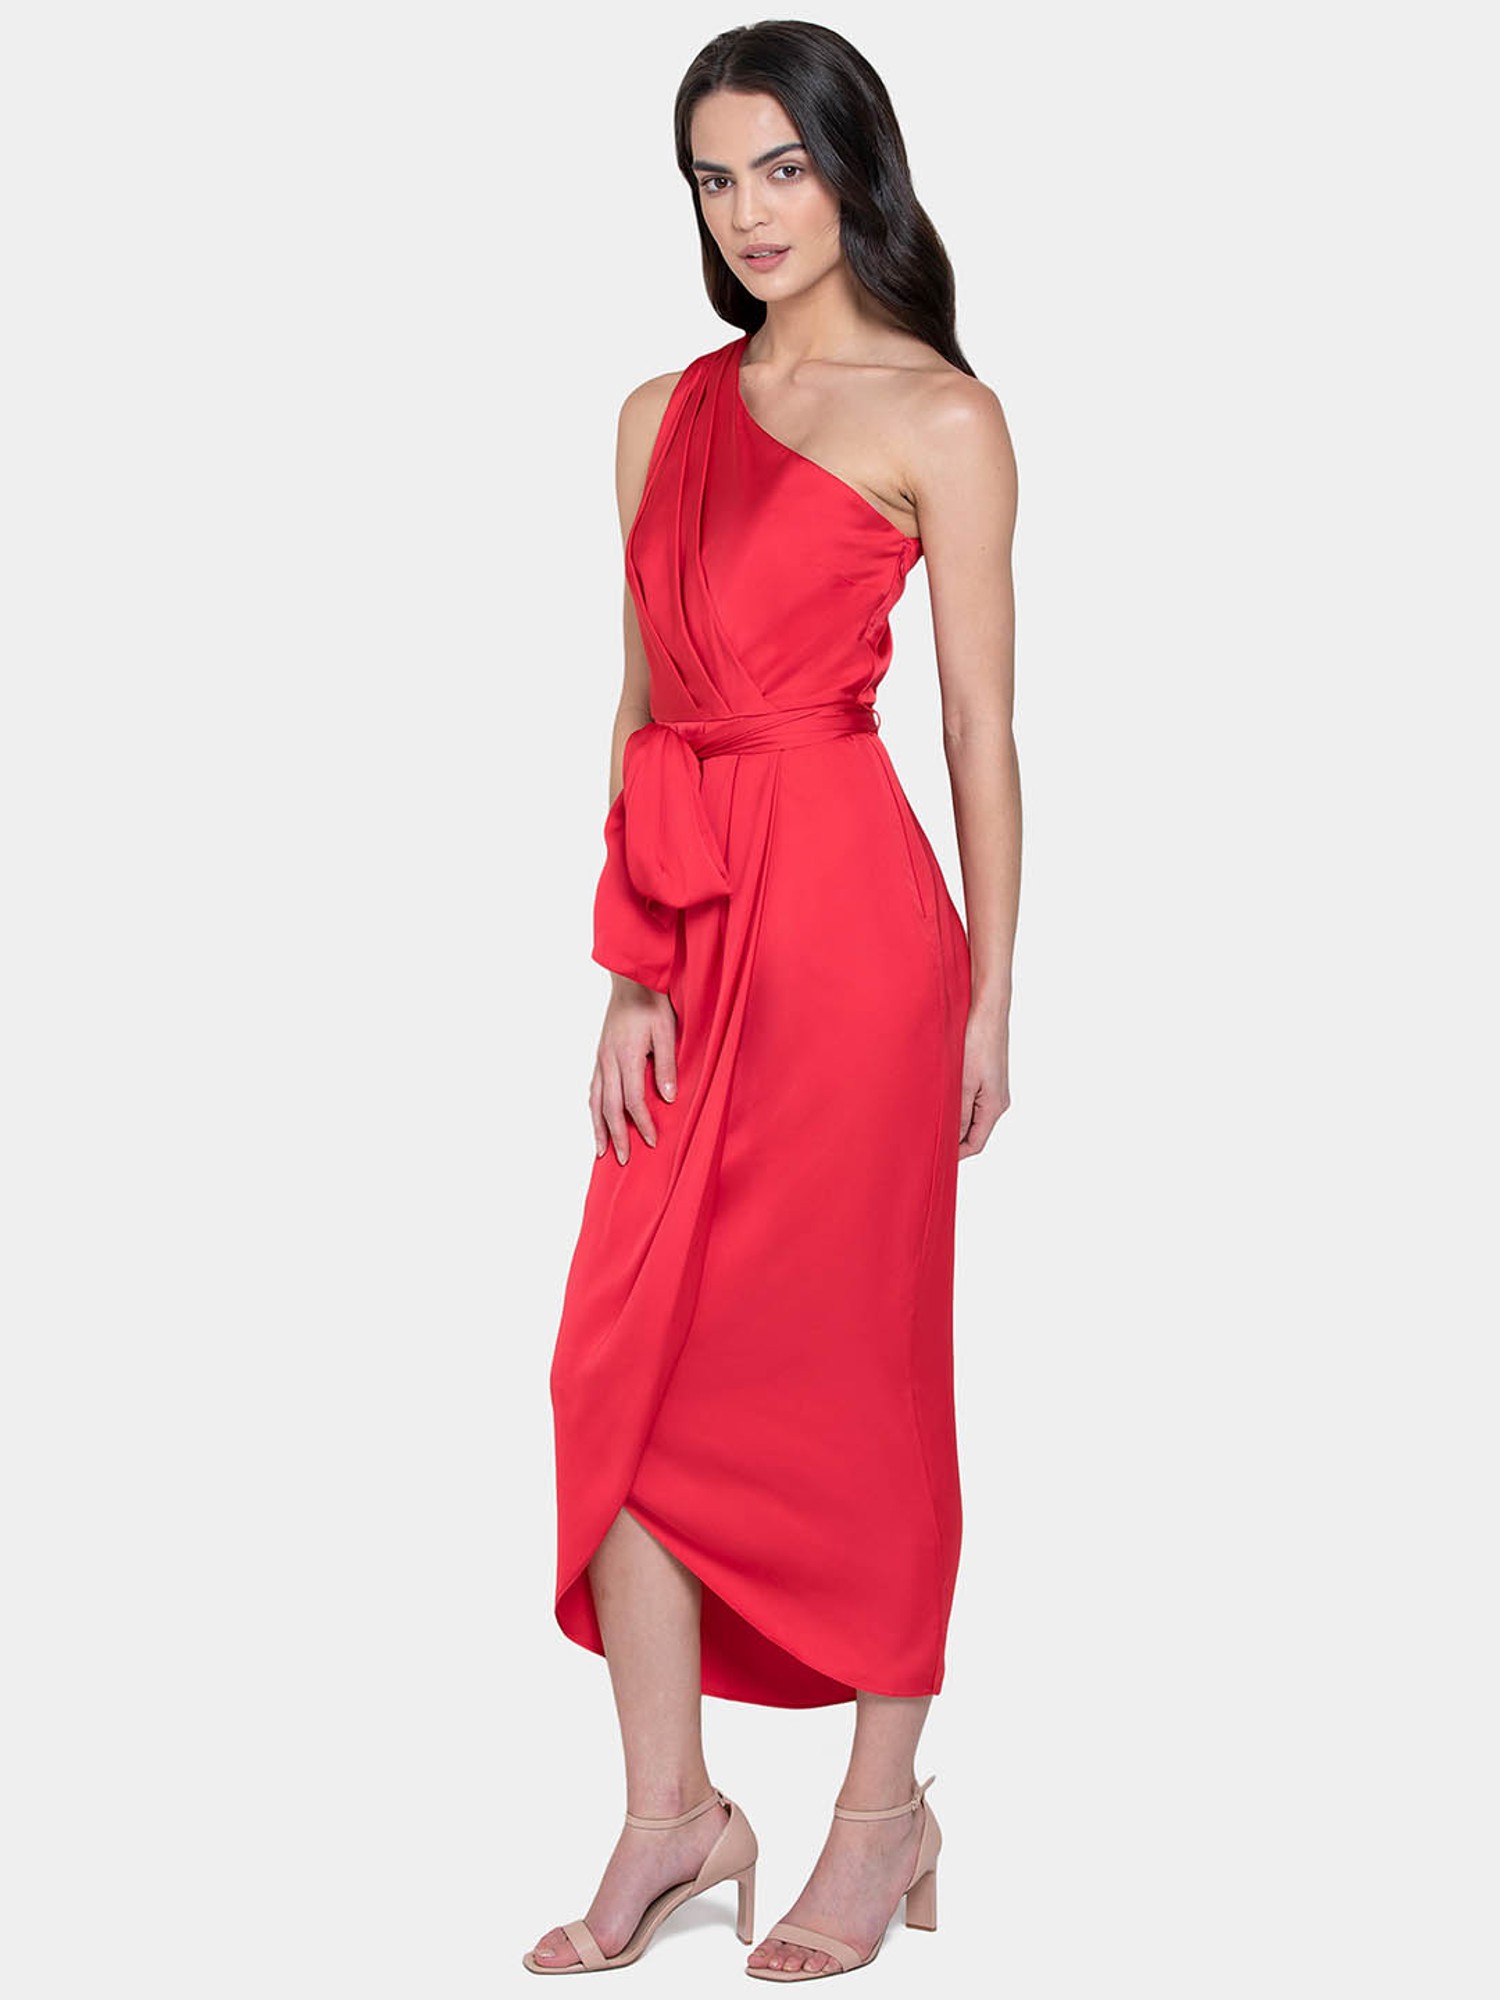 Buy Red Cocktail Dress One Shoulder Red Dress Women Formal Long Online in  India  Etsy